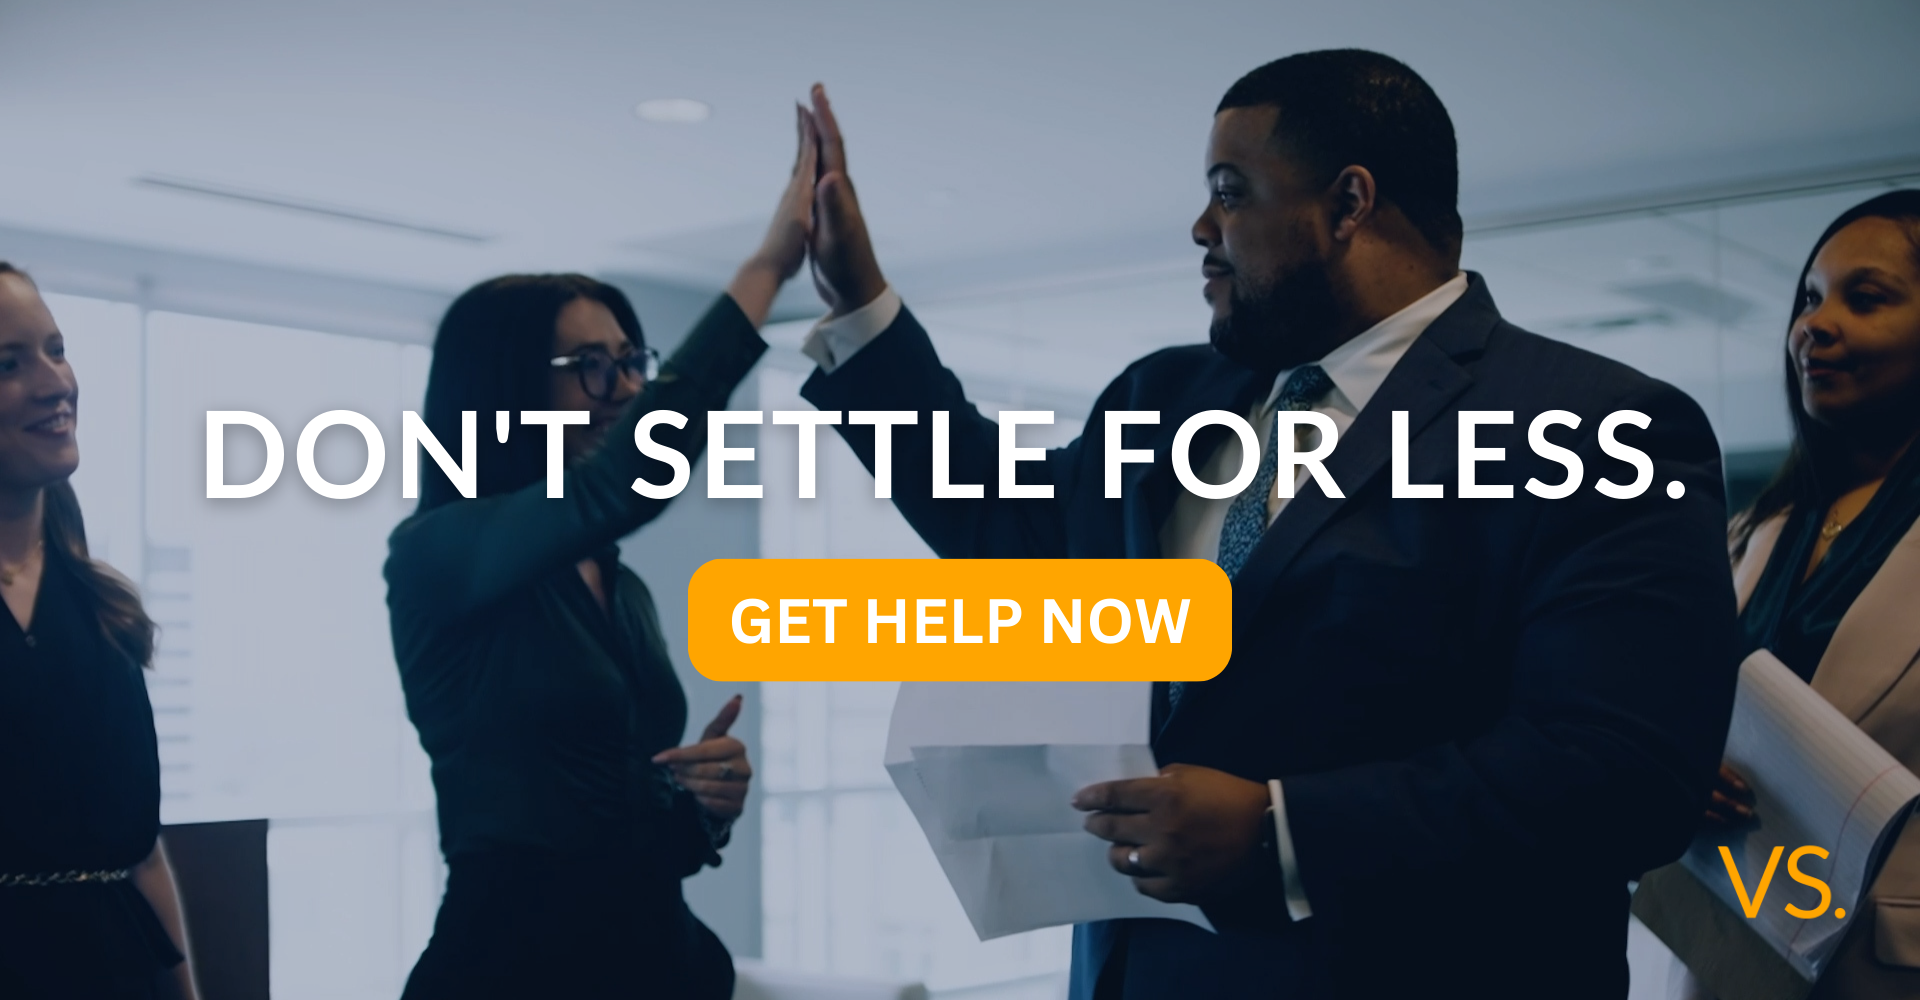 Hire our personal injury attorneys who do not settle for less.